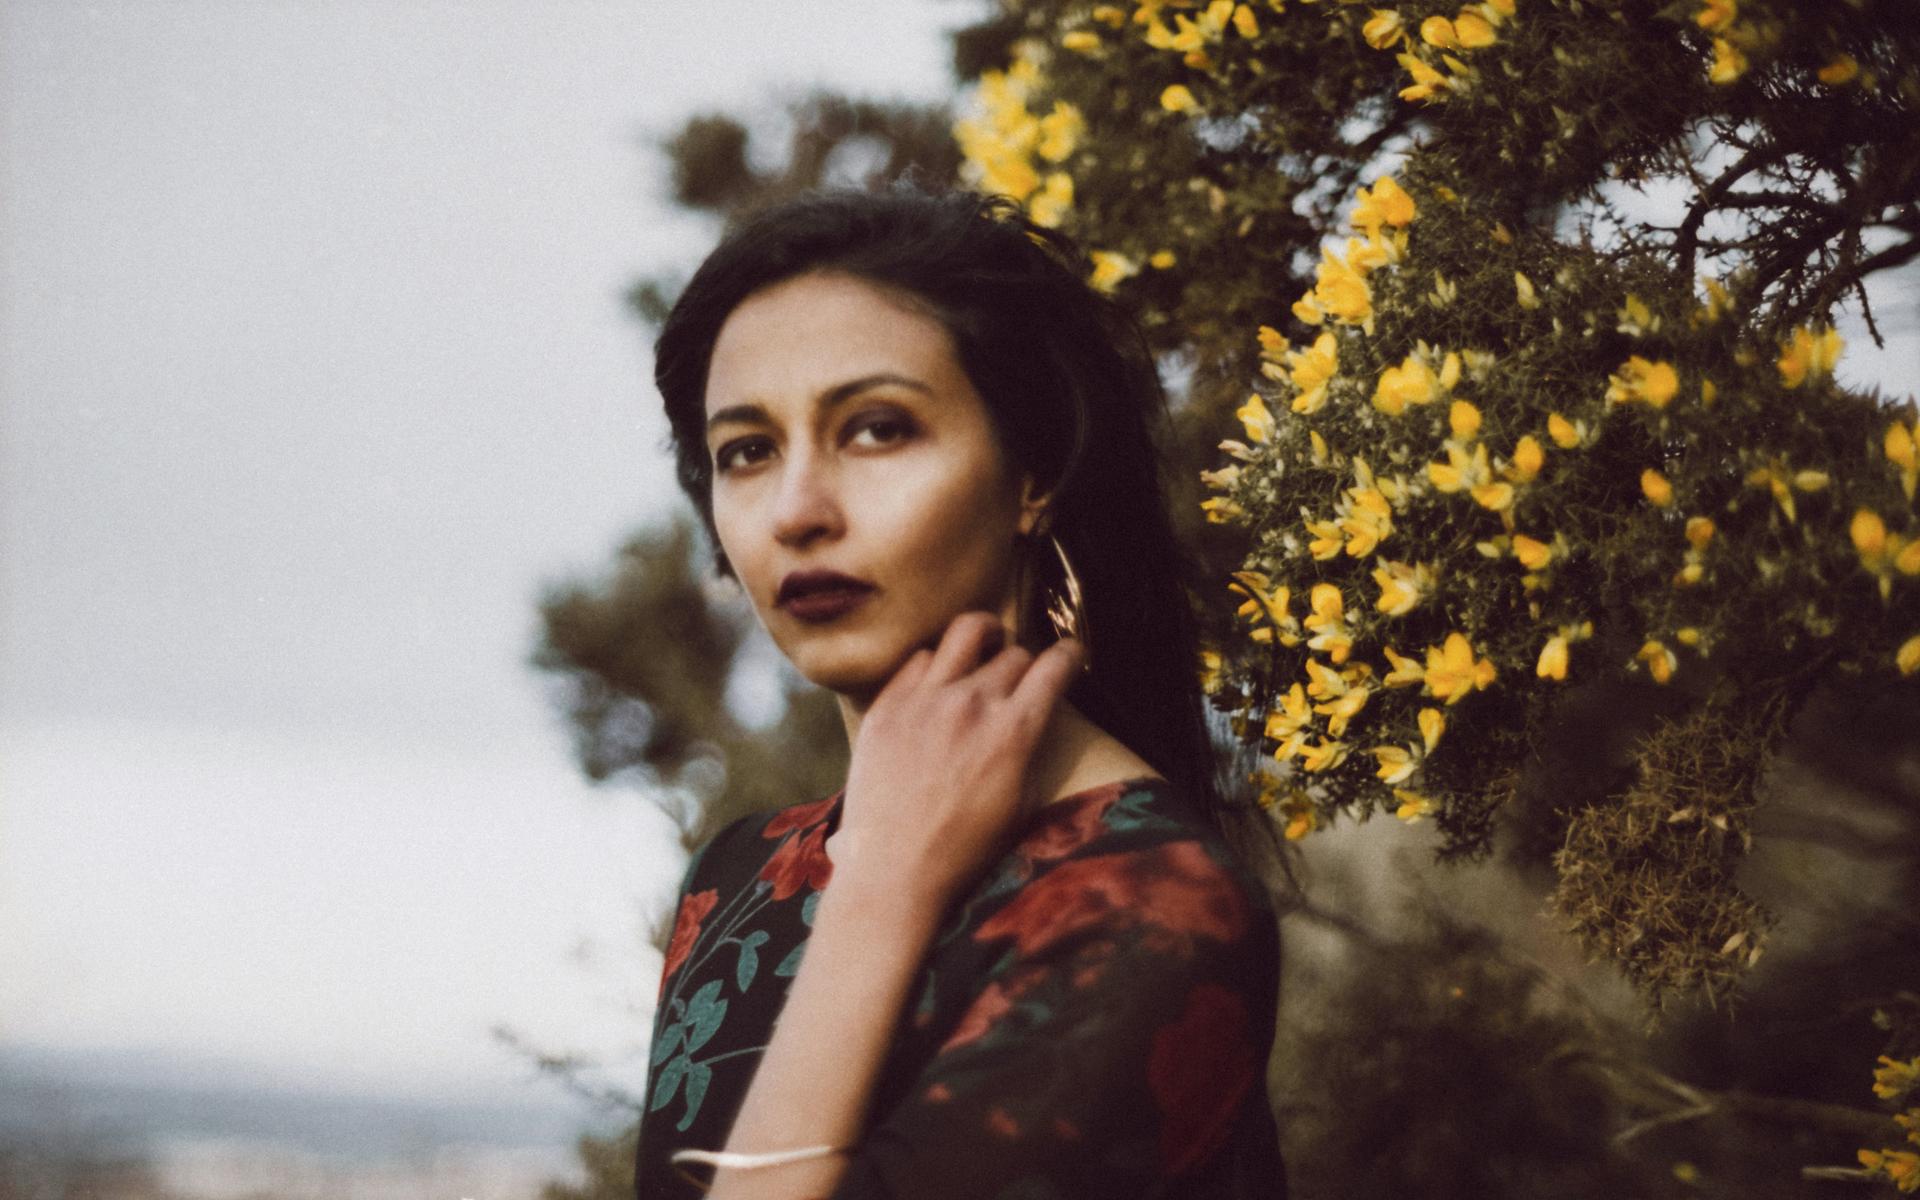 Artist Lakshmi Ramgopal poses in front of yellow flowers in this 2017 photograph.